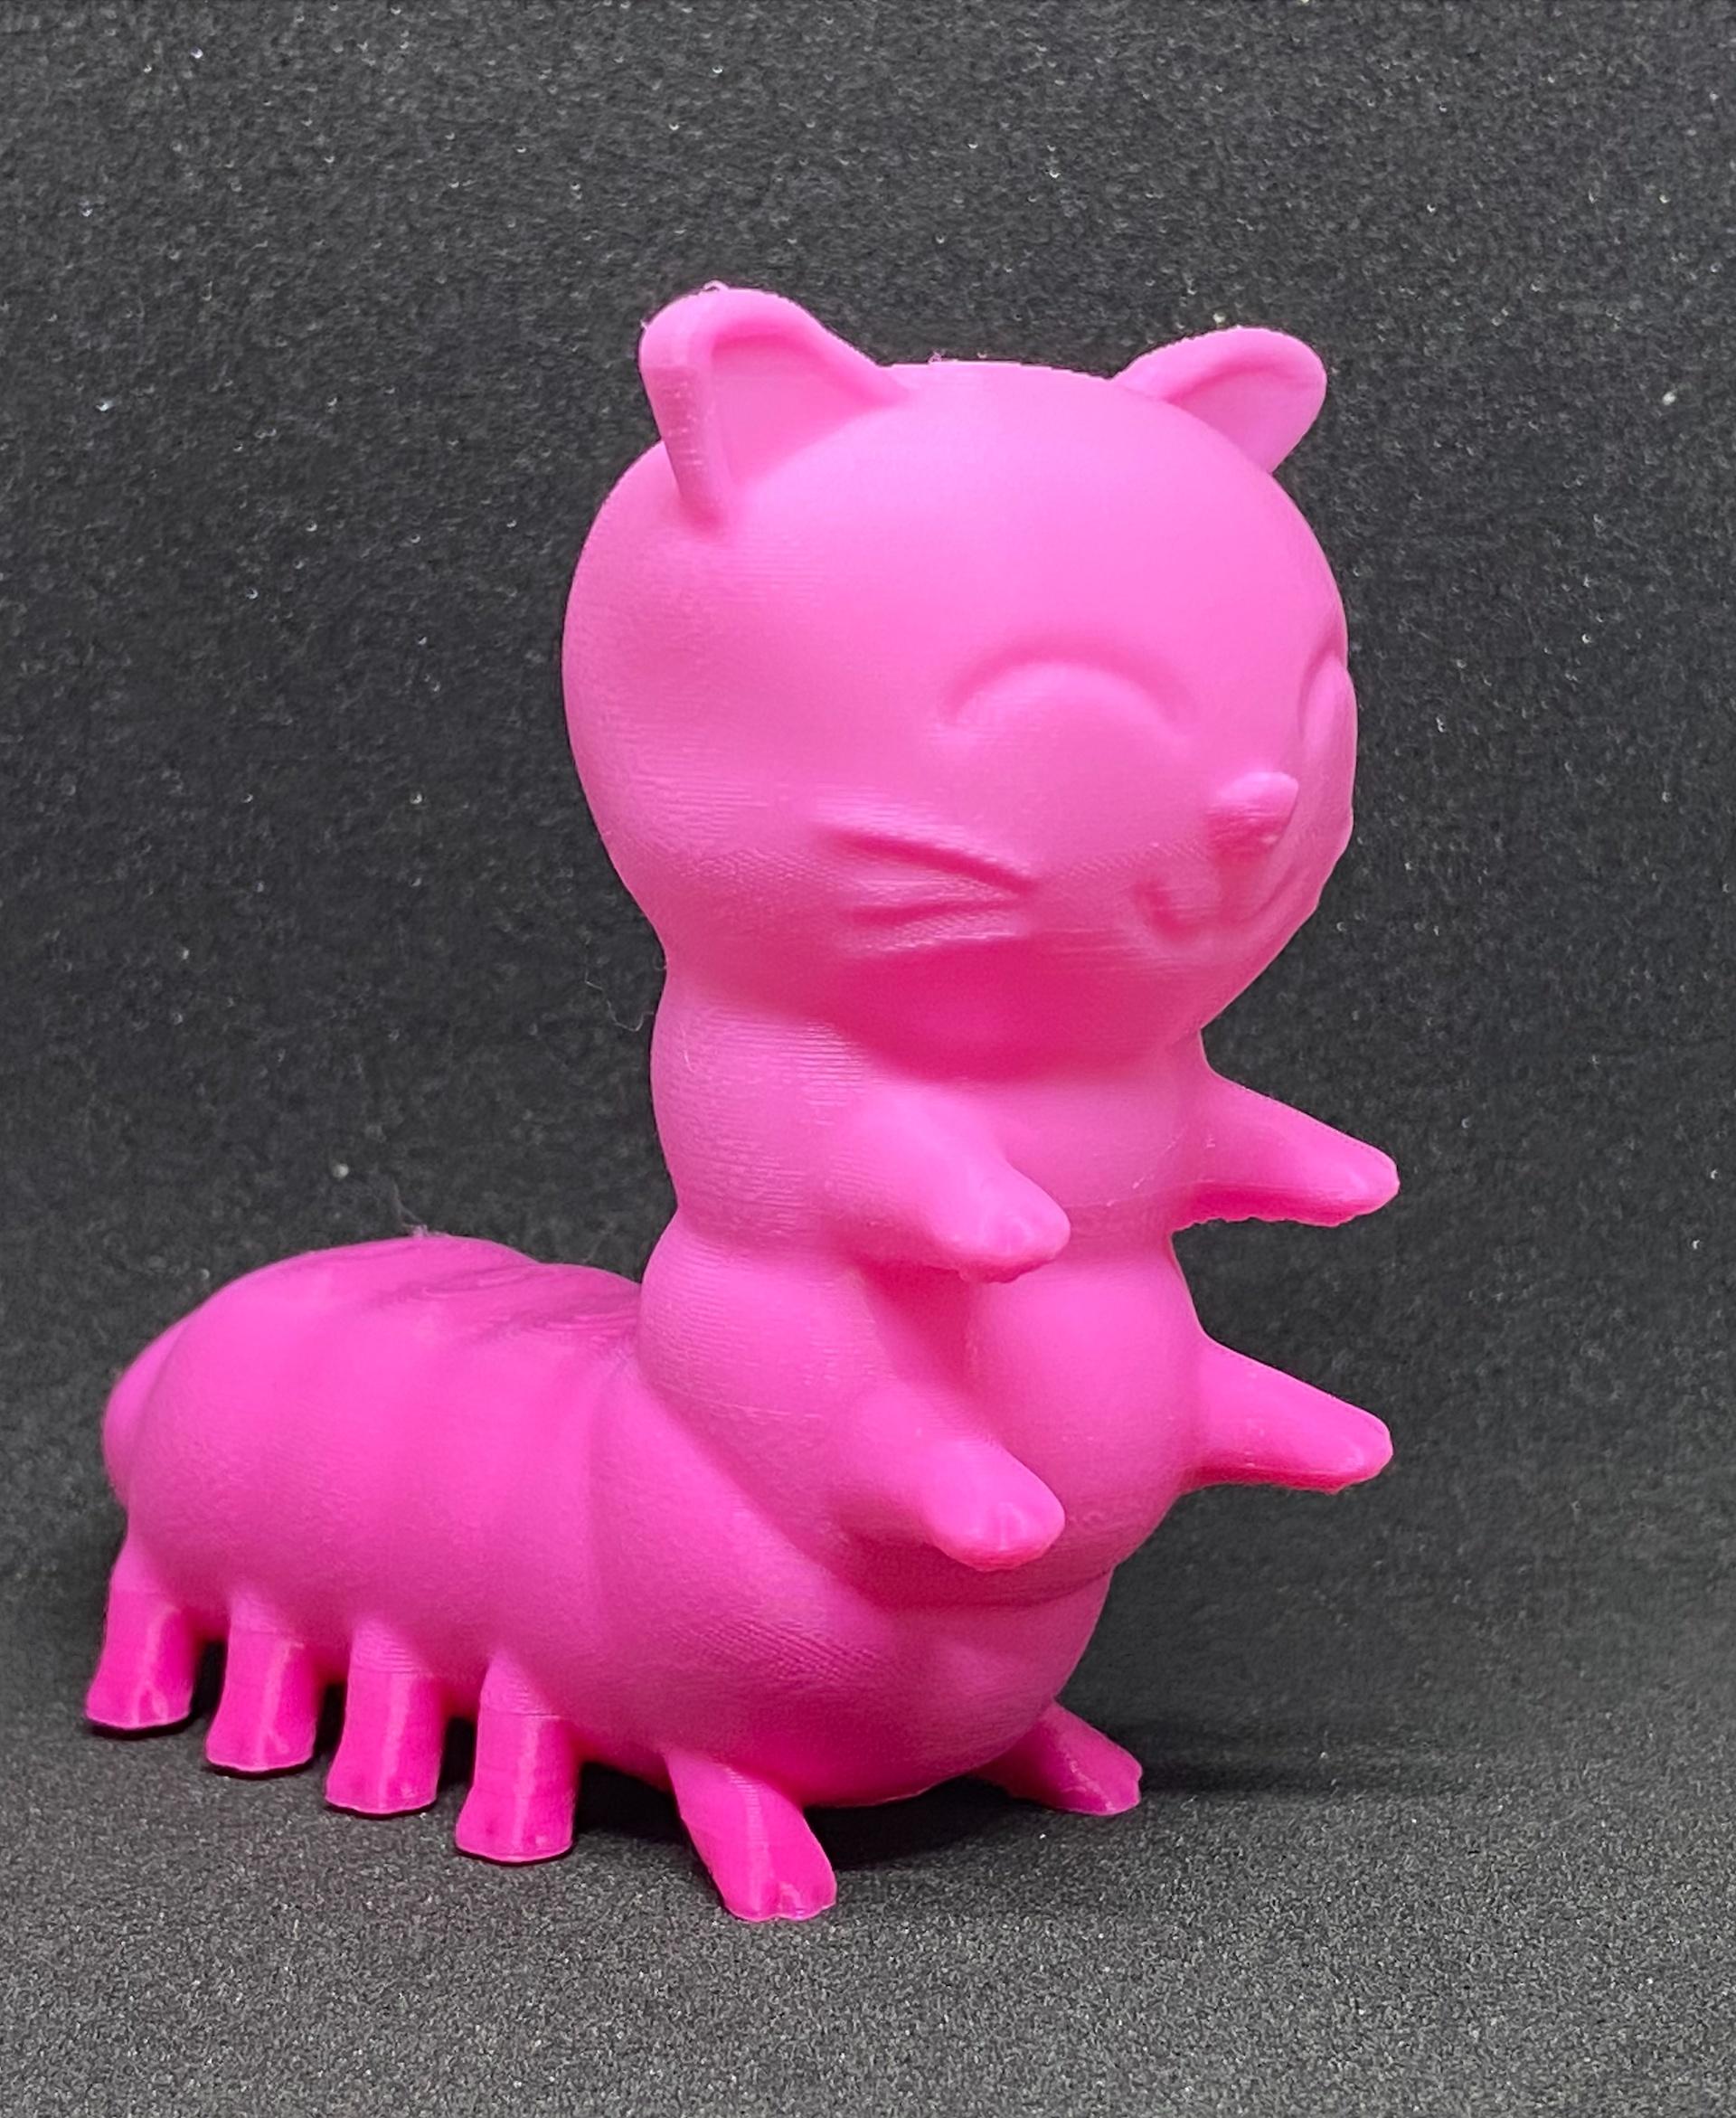 CAT-erpillar  - I couldn't help myself. I had to print it. Thanks for making the model available! - 3d model